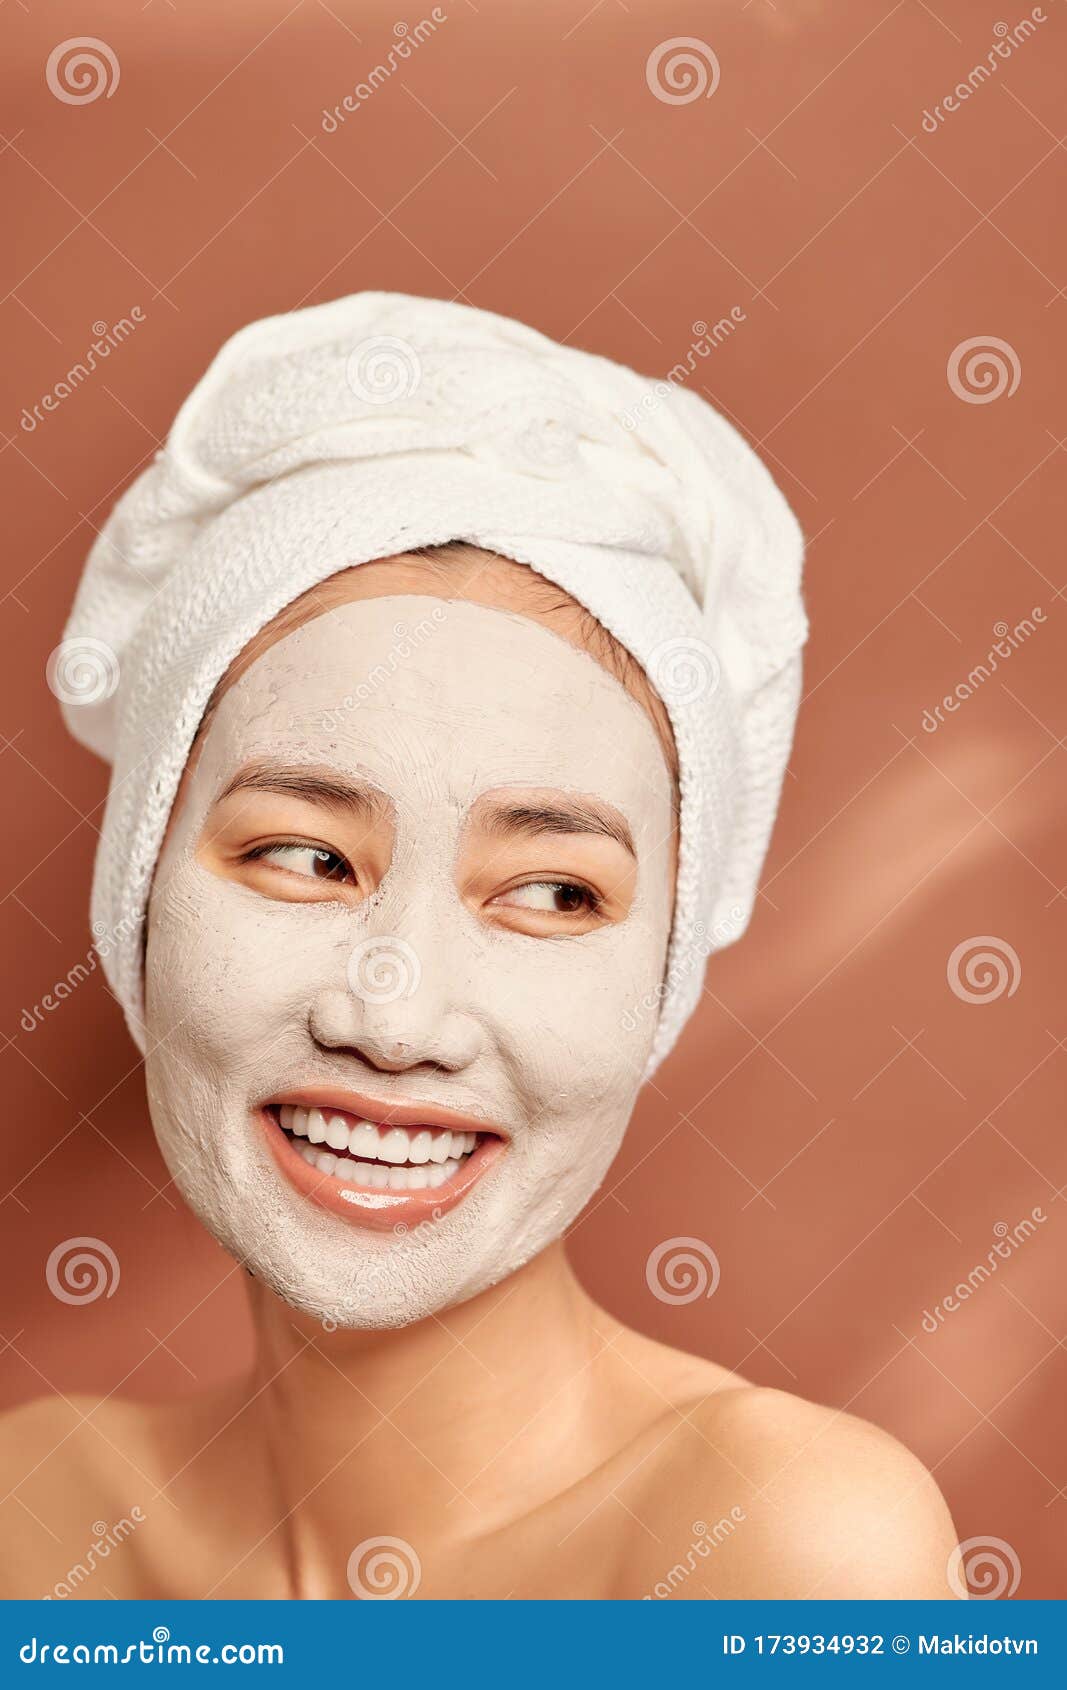 https://thumbs.dreamstime.com/z/close-up-portrait-charming-asian-woman-white-towel-her-head-clay-mask-her-face-close-up-portrait-charming-173934932.jpg